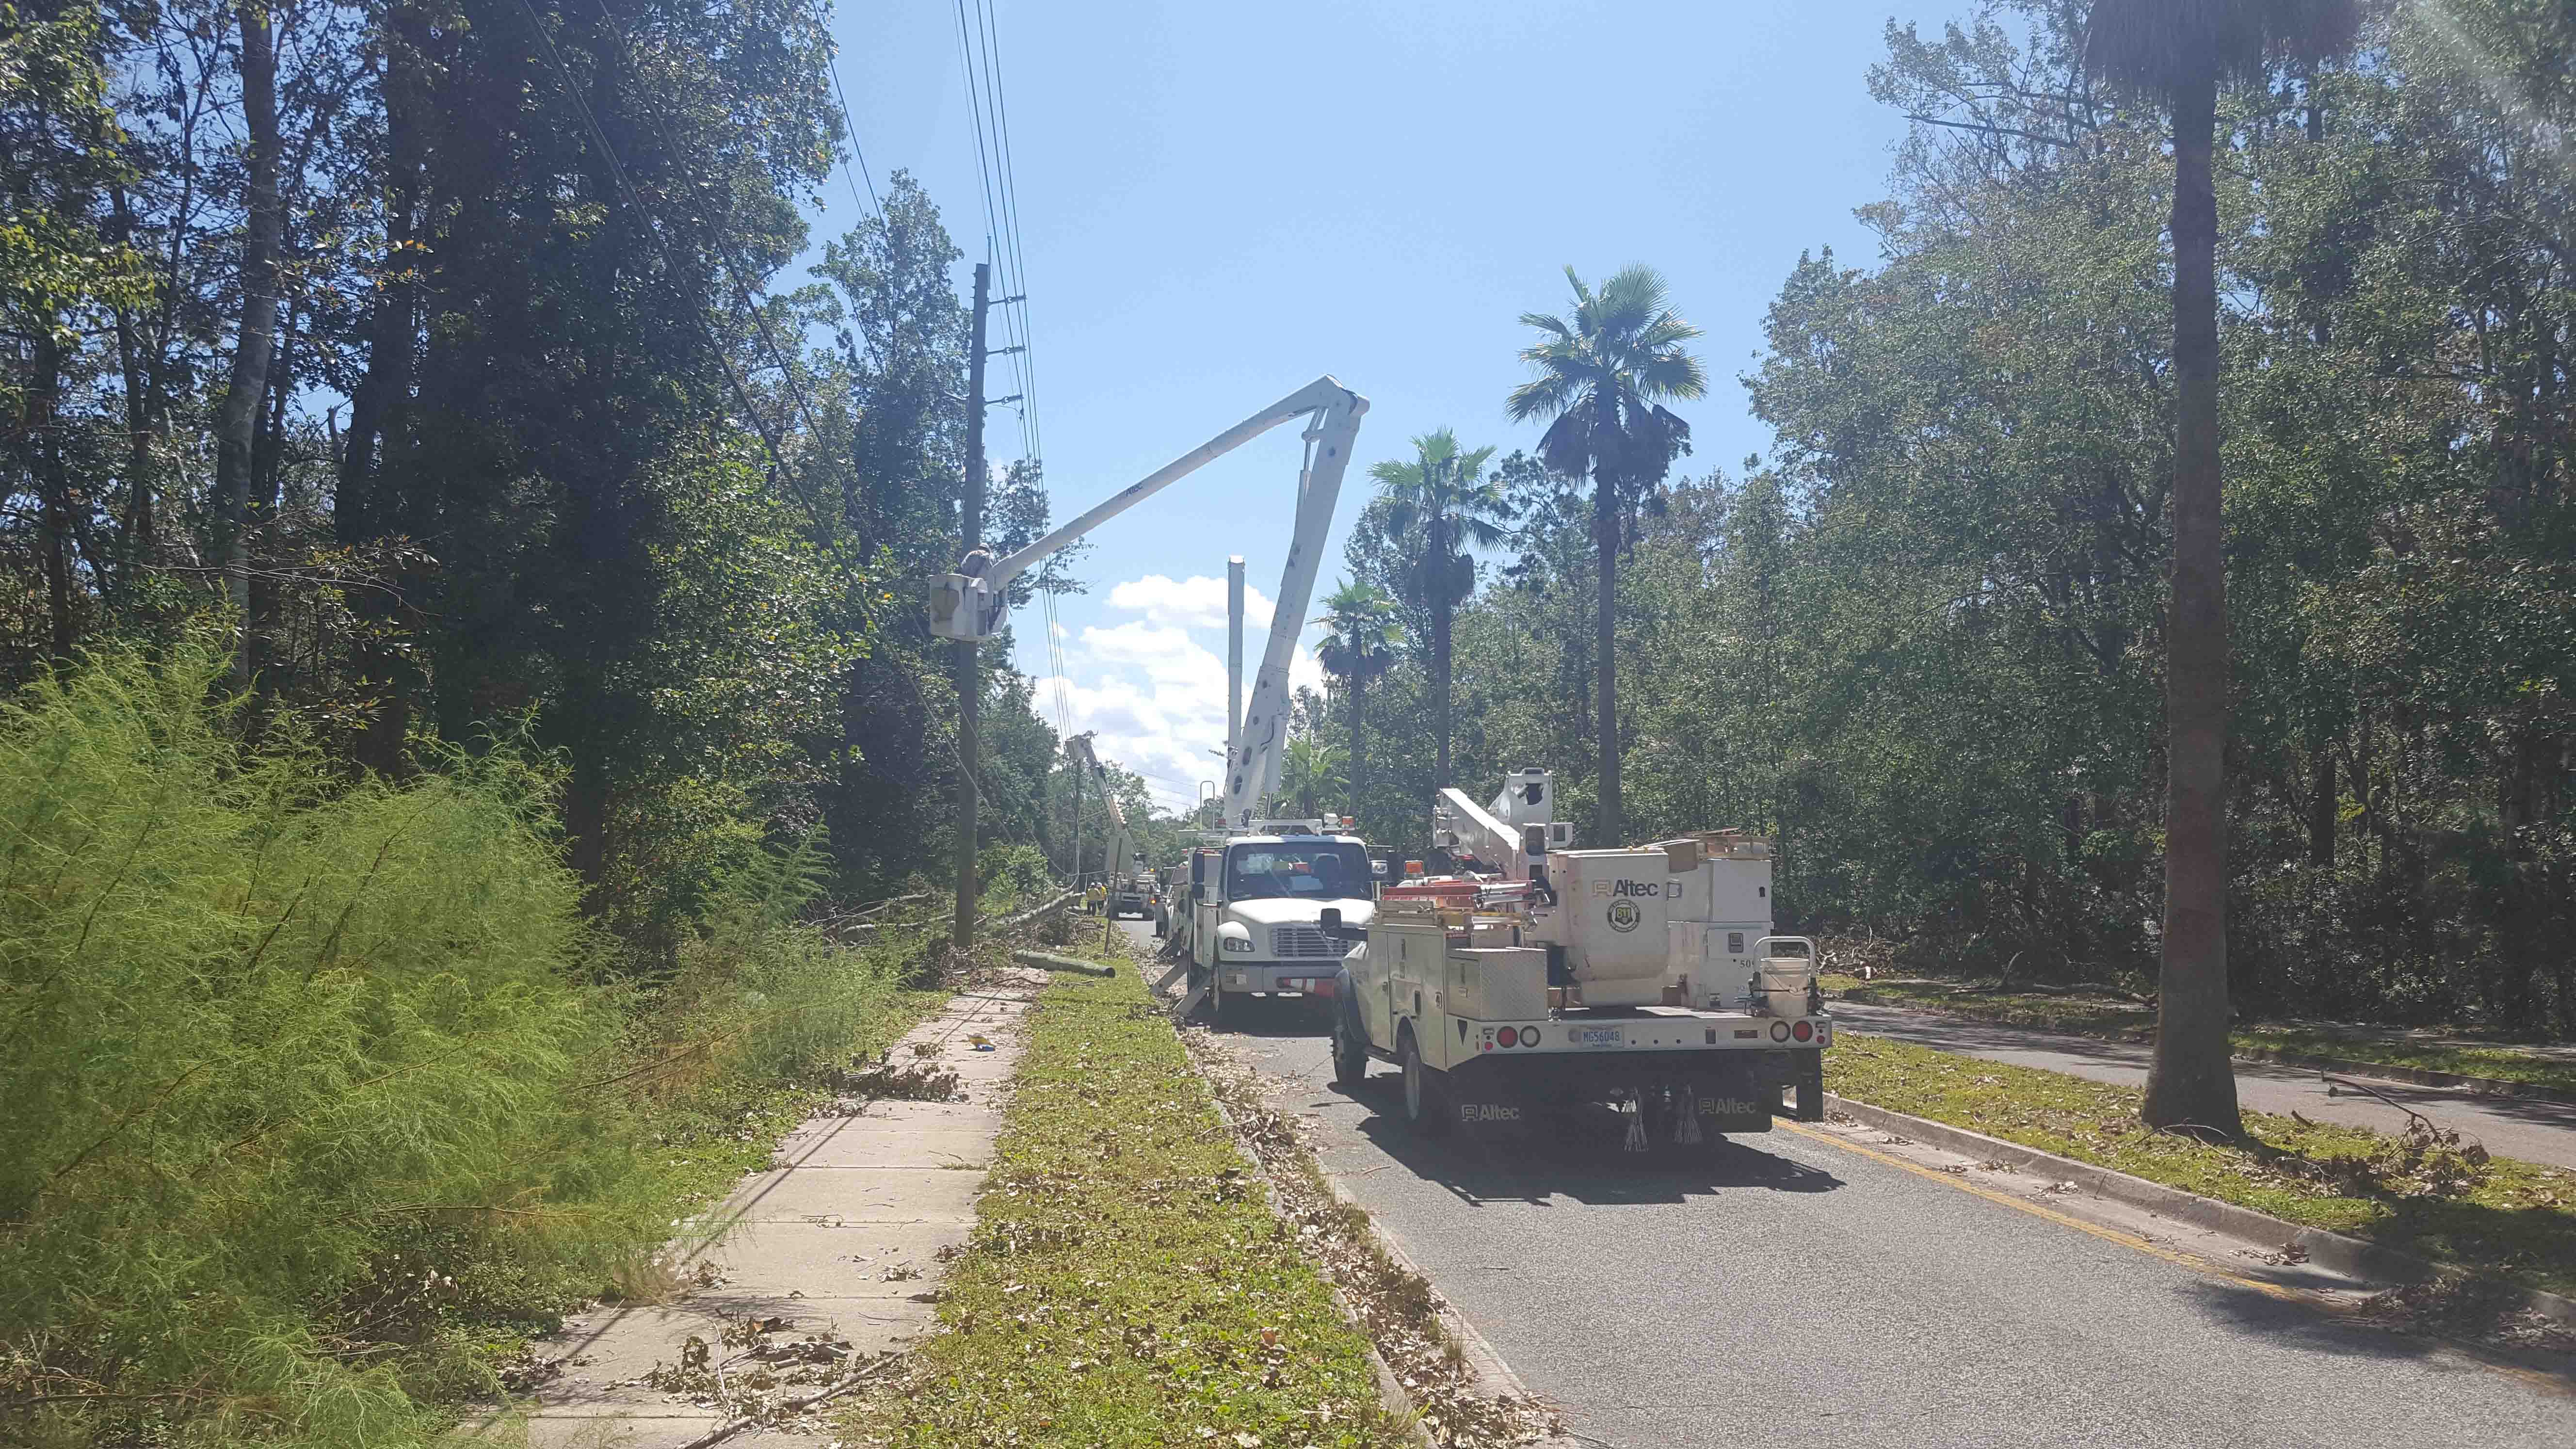 City of Rock Hill electric linemen assisting Florida